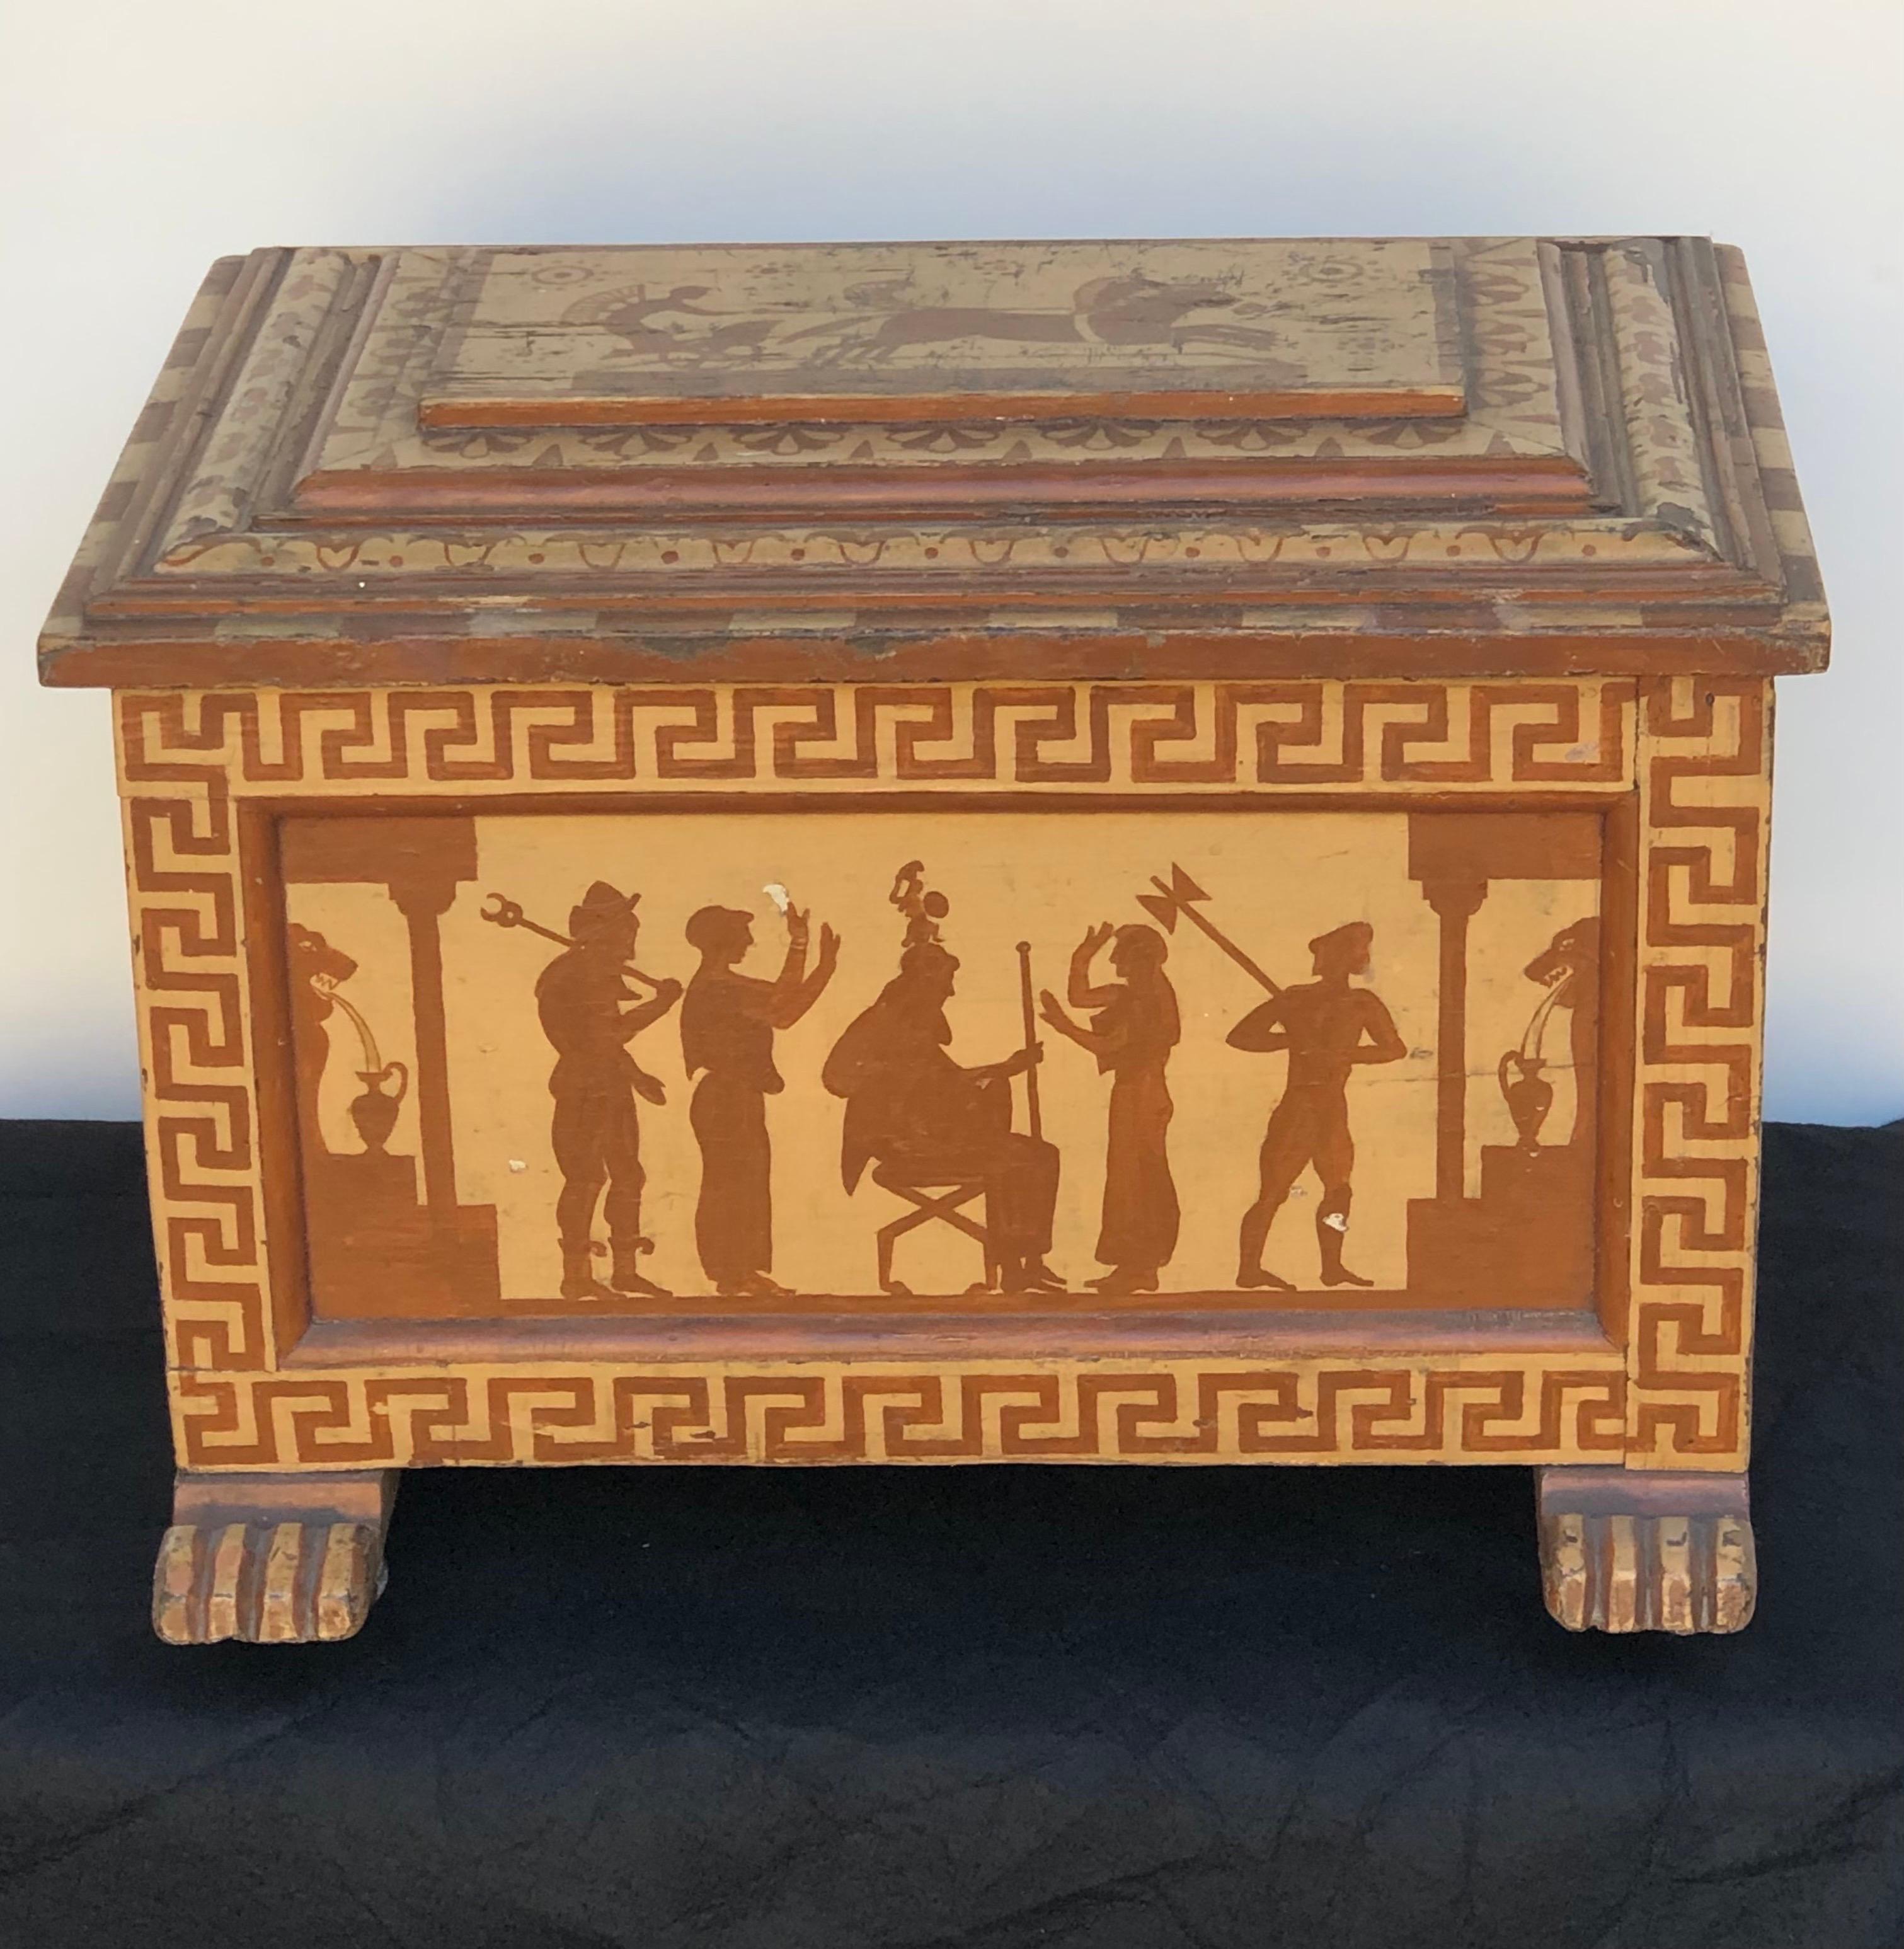 Hand-Crafted English Regency Sarcophagus Egyptian Revival Kindling Box